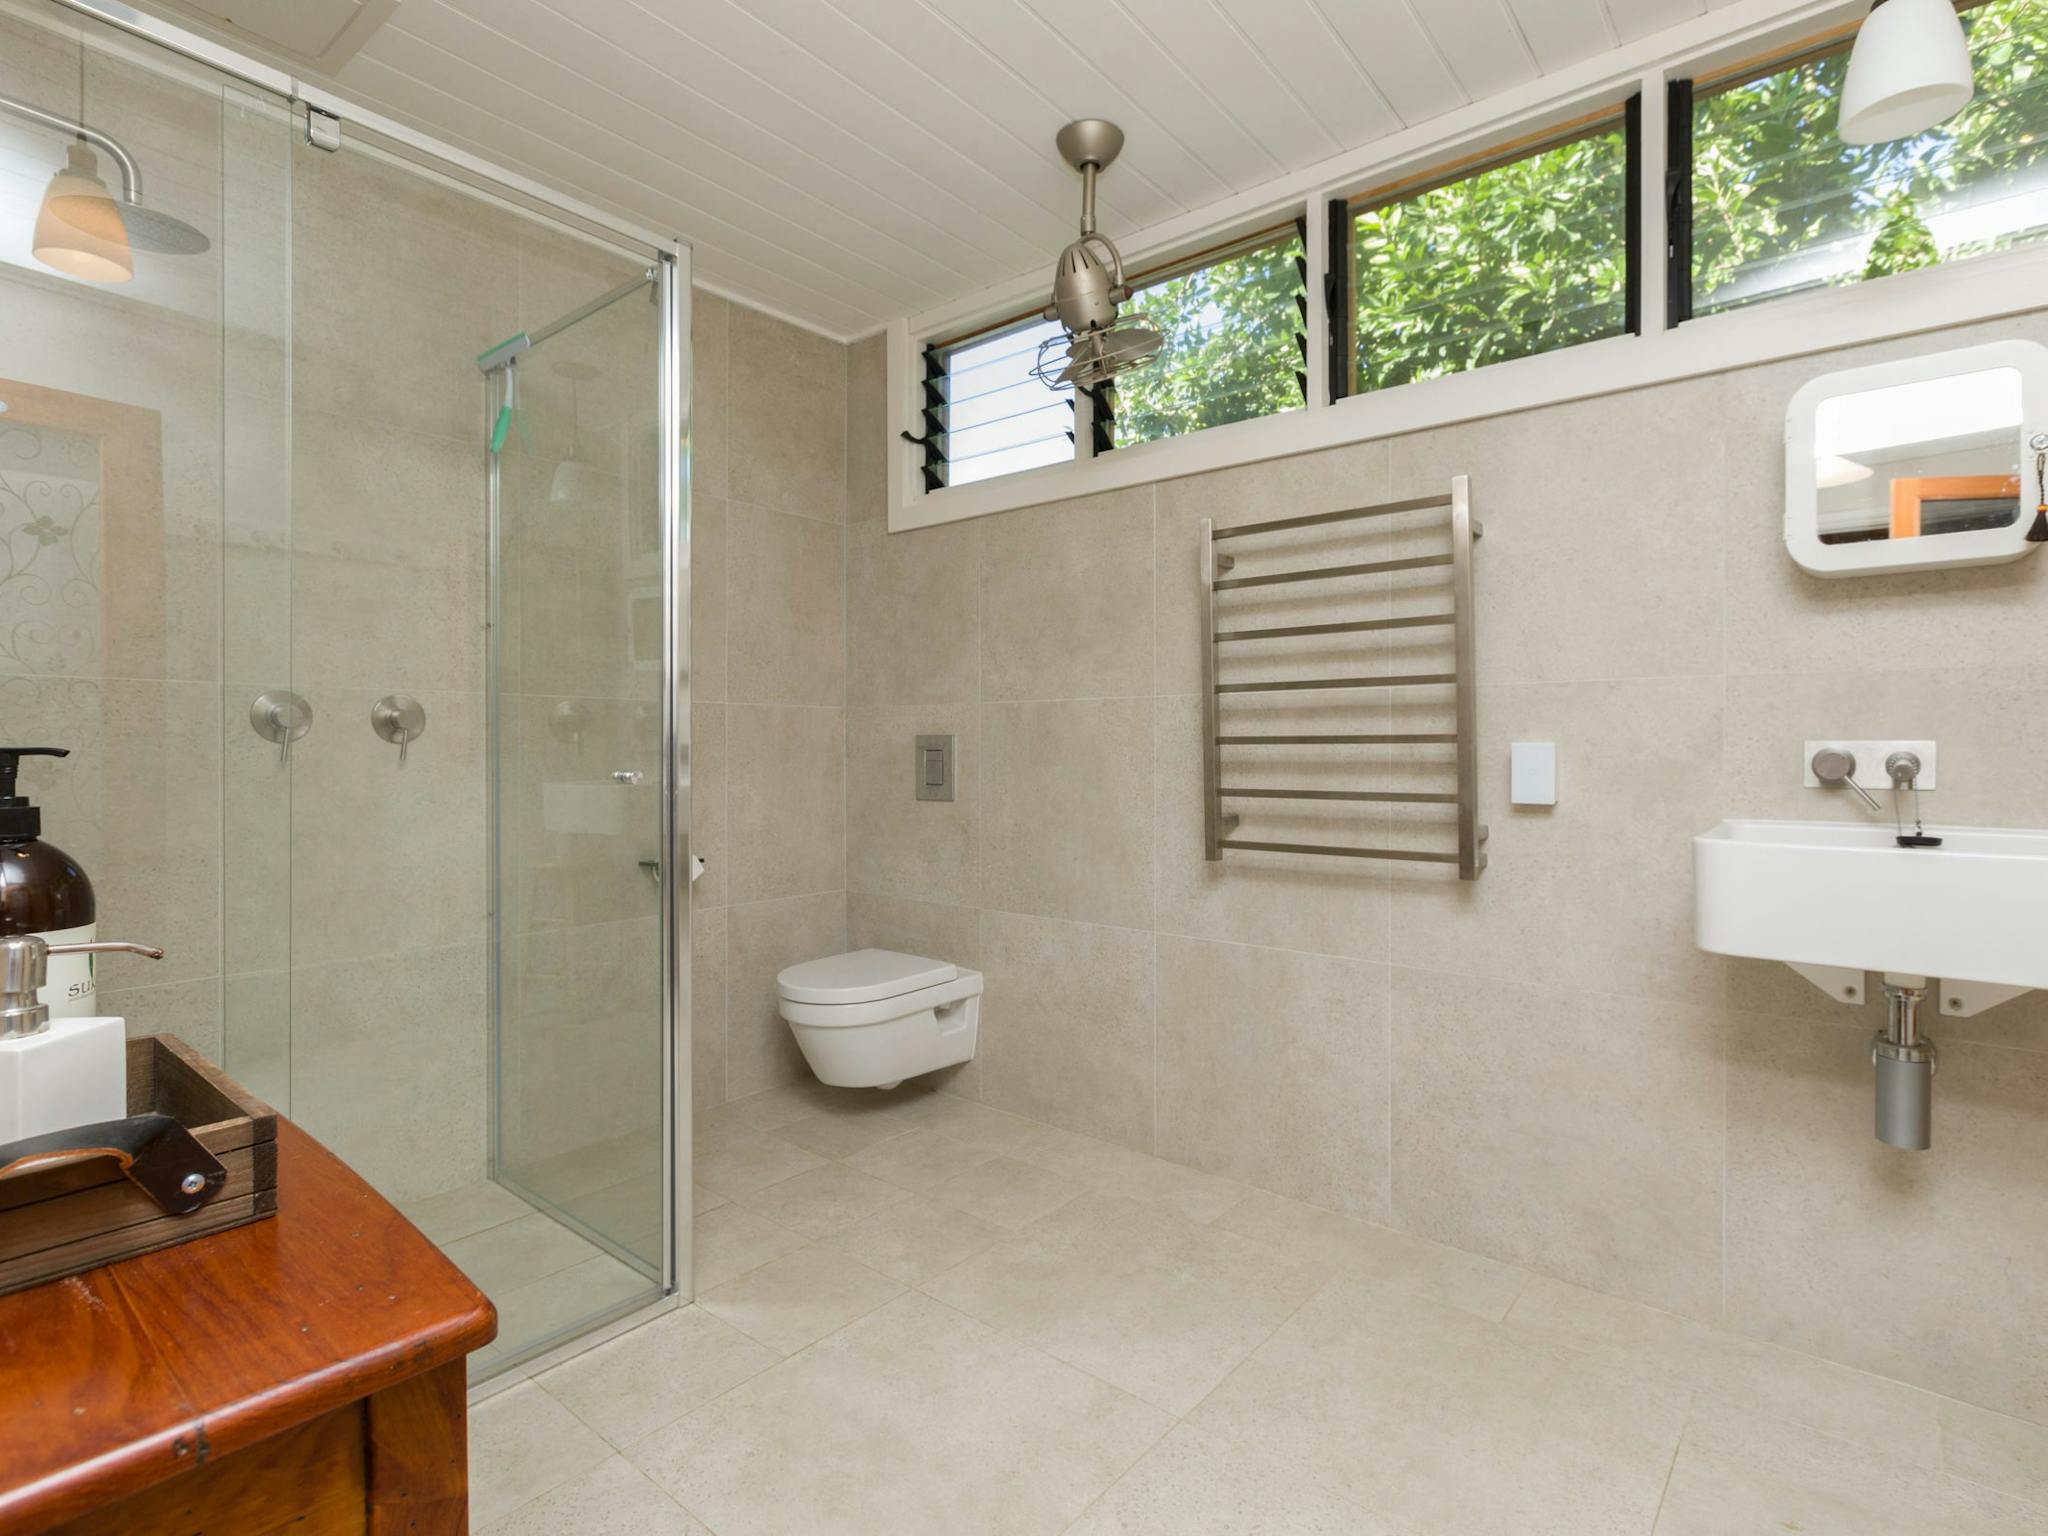 State of the art bathroom, fully equipped and luxury shower.